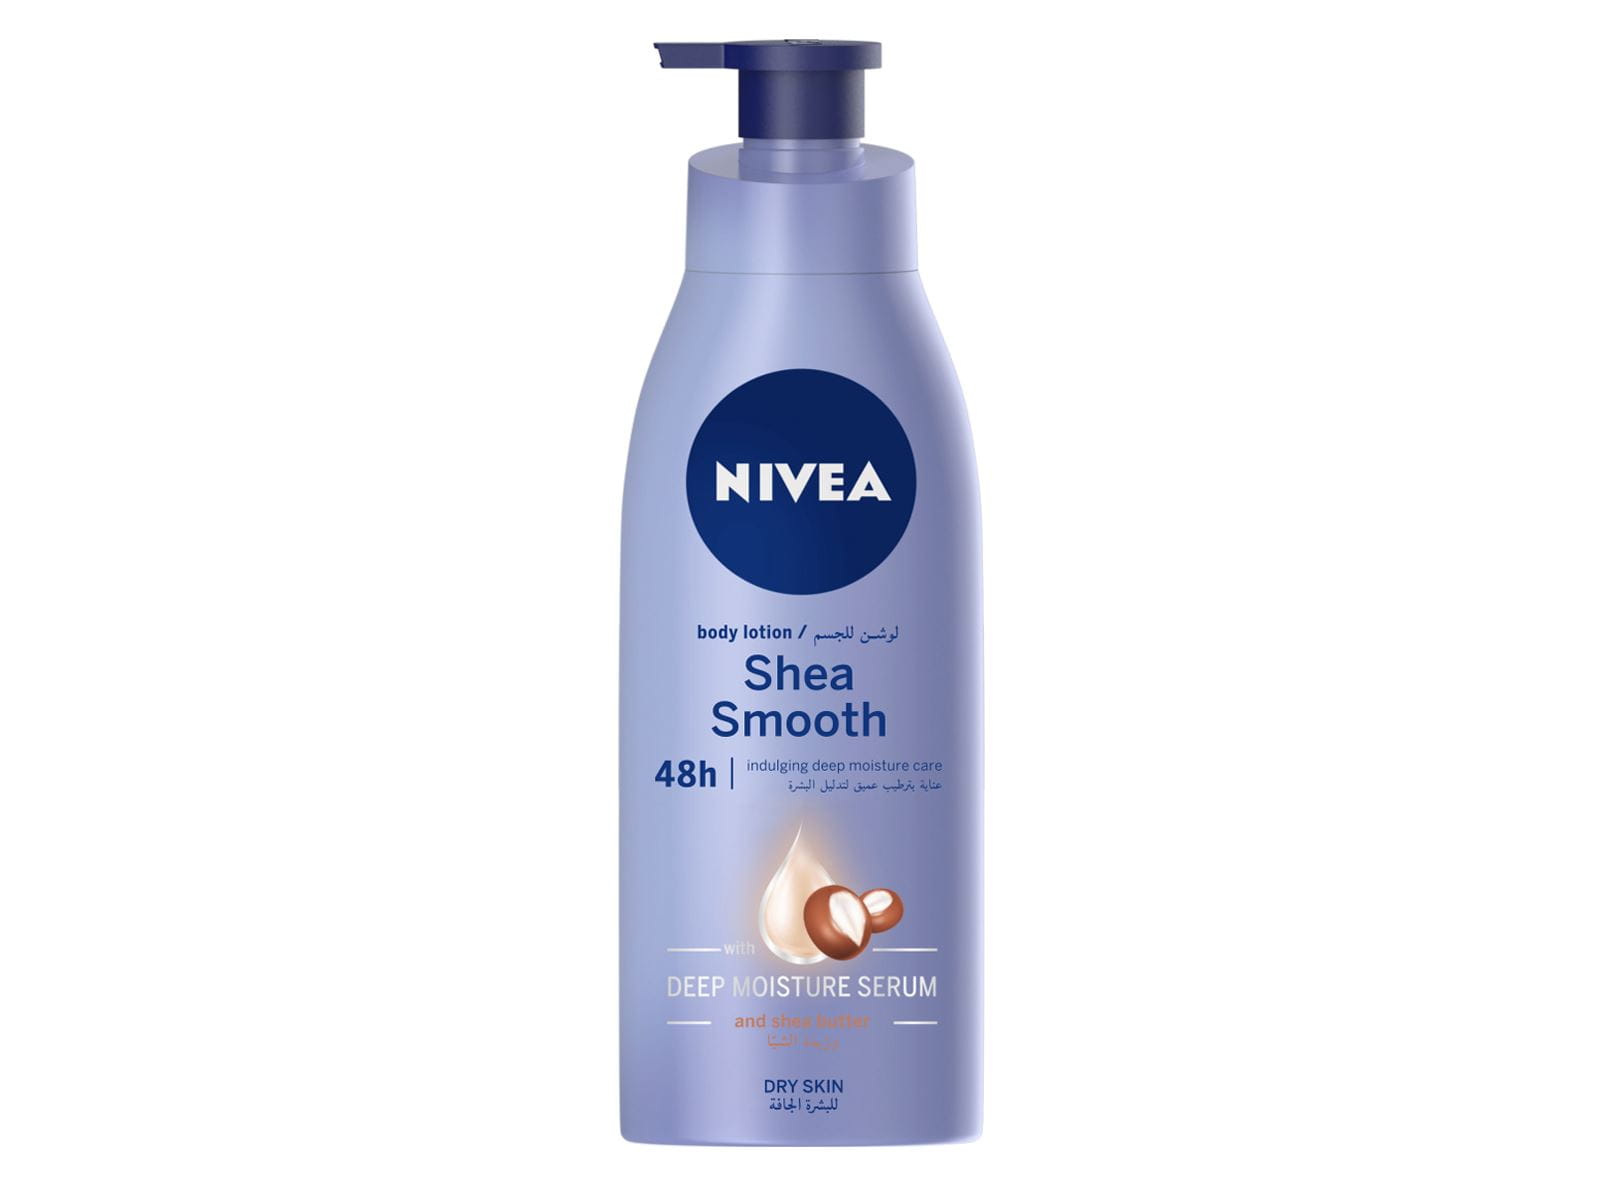 Smoothing Body Lotion - Lotion for Smooth Skin